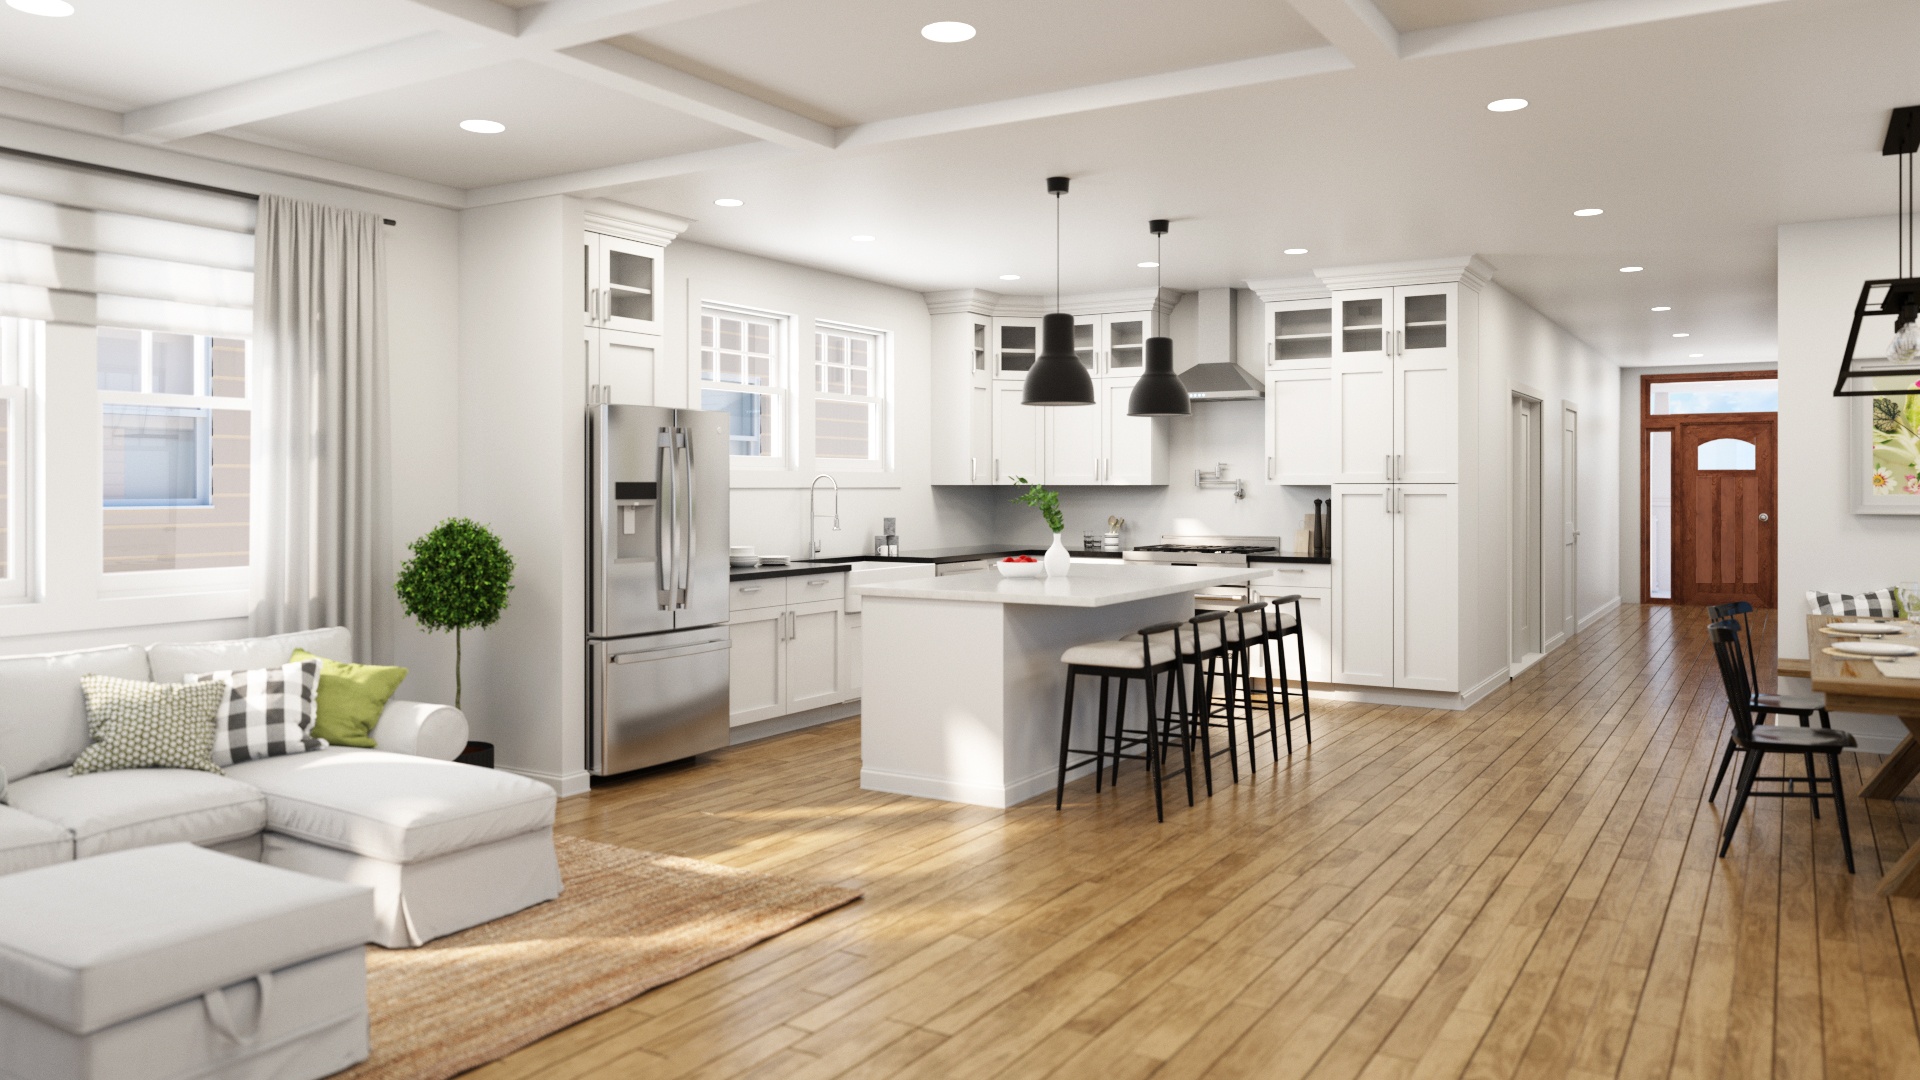 Photorealistic rendering of a new construction kitchen